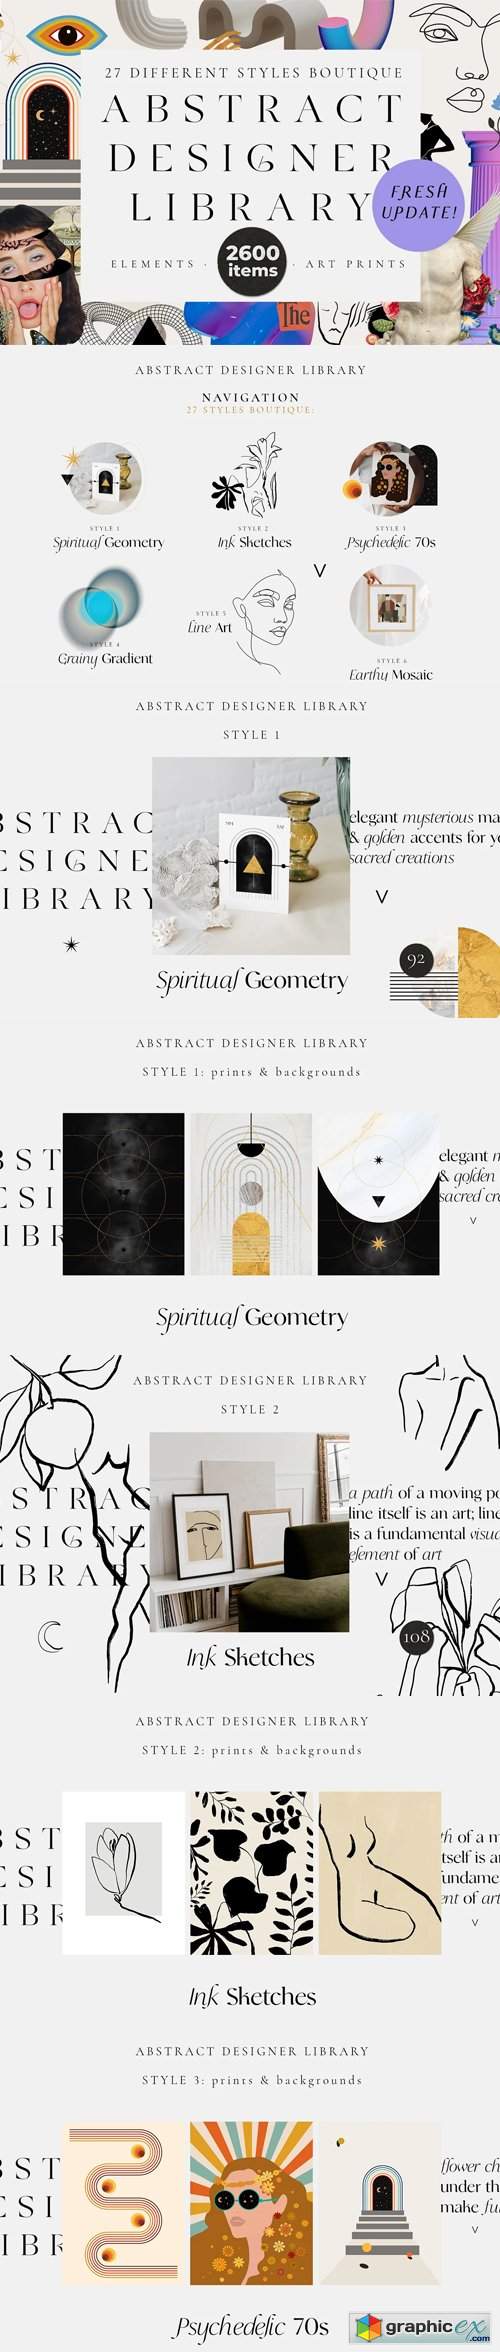 UPDATE!! ABSTRACT DESIGNER LIBRARY 